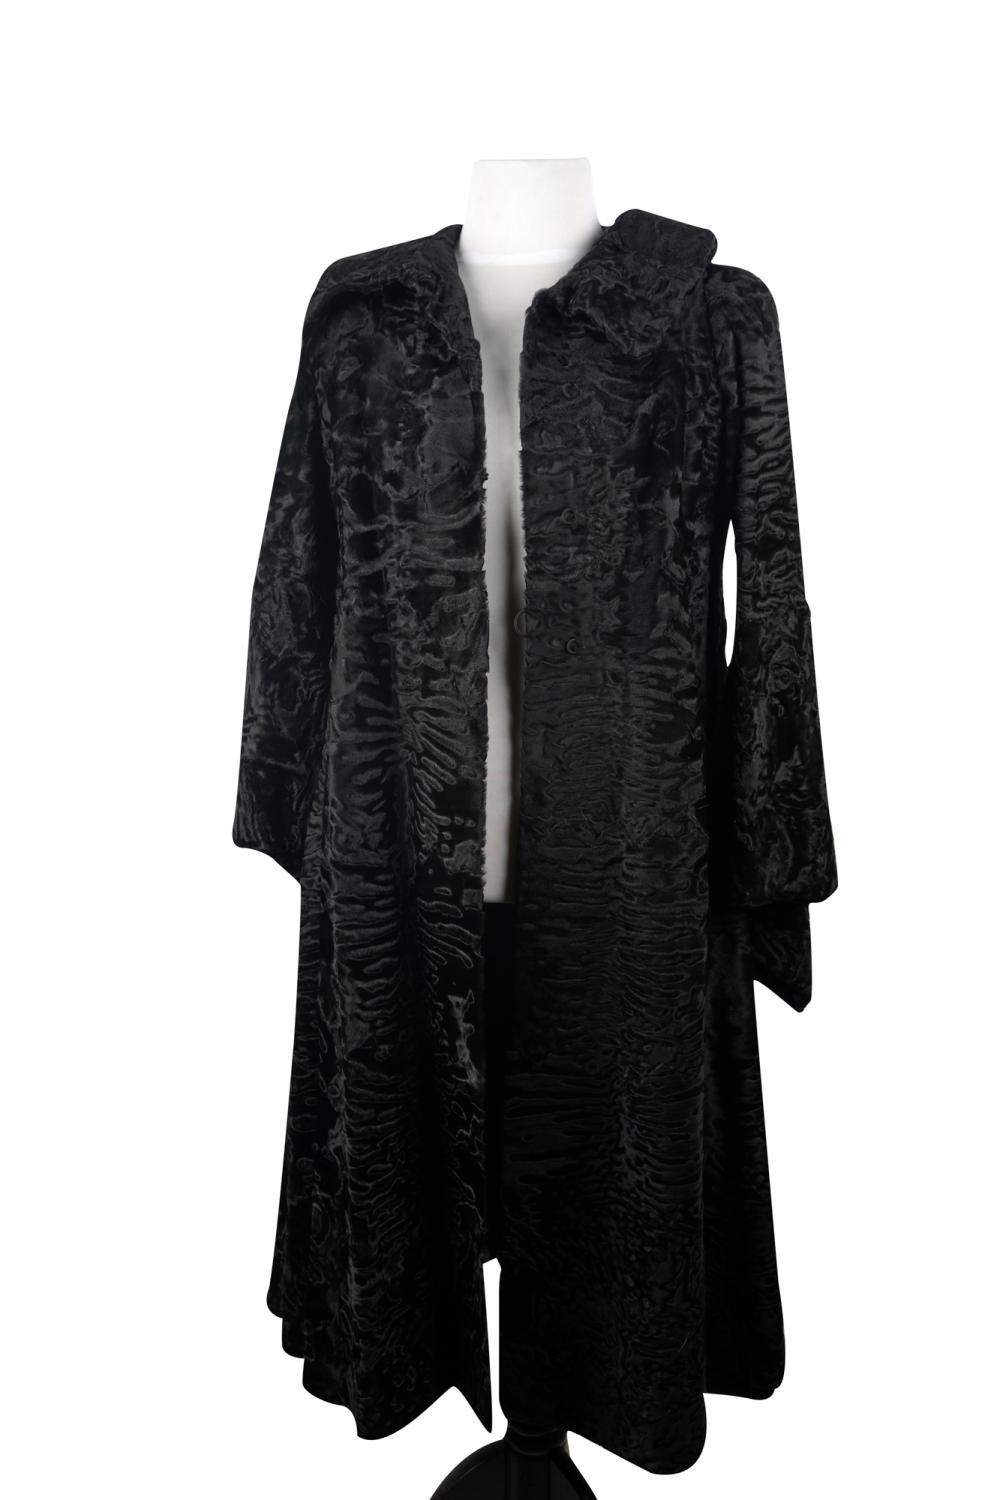 BLACK FUR COATwith bell sleeves  3376e3